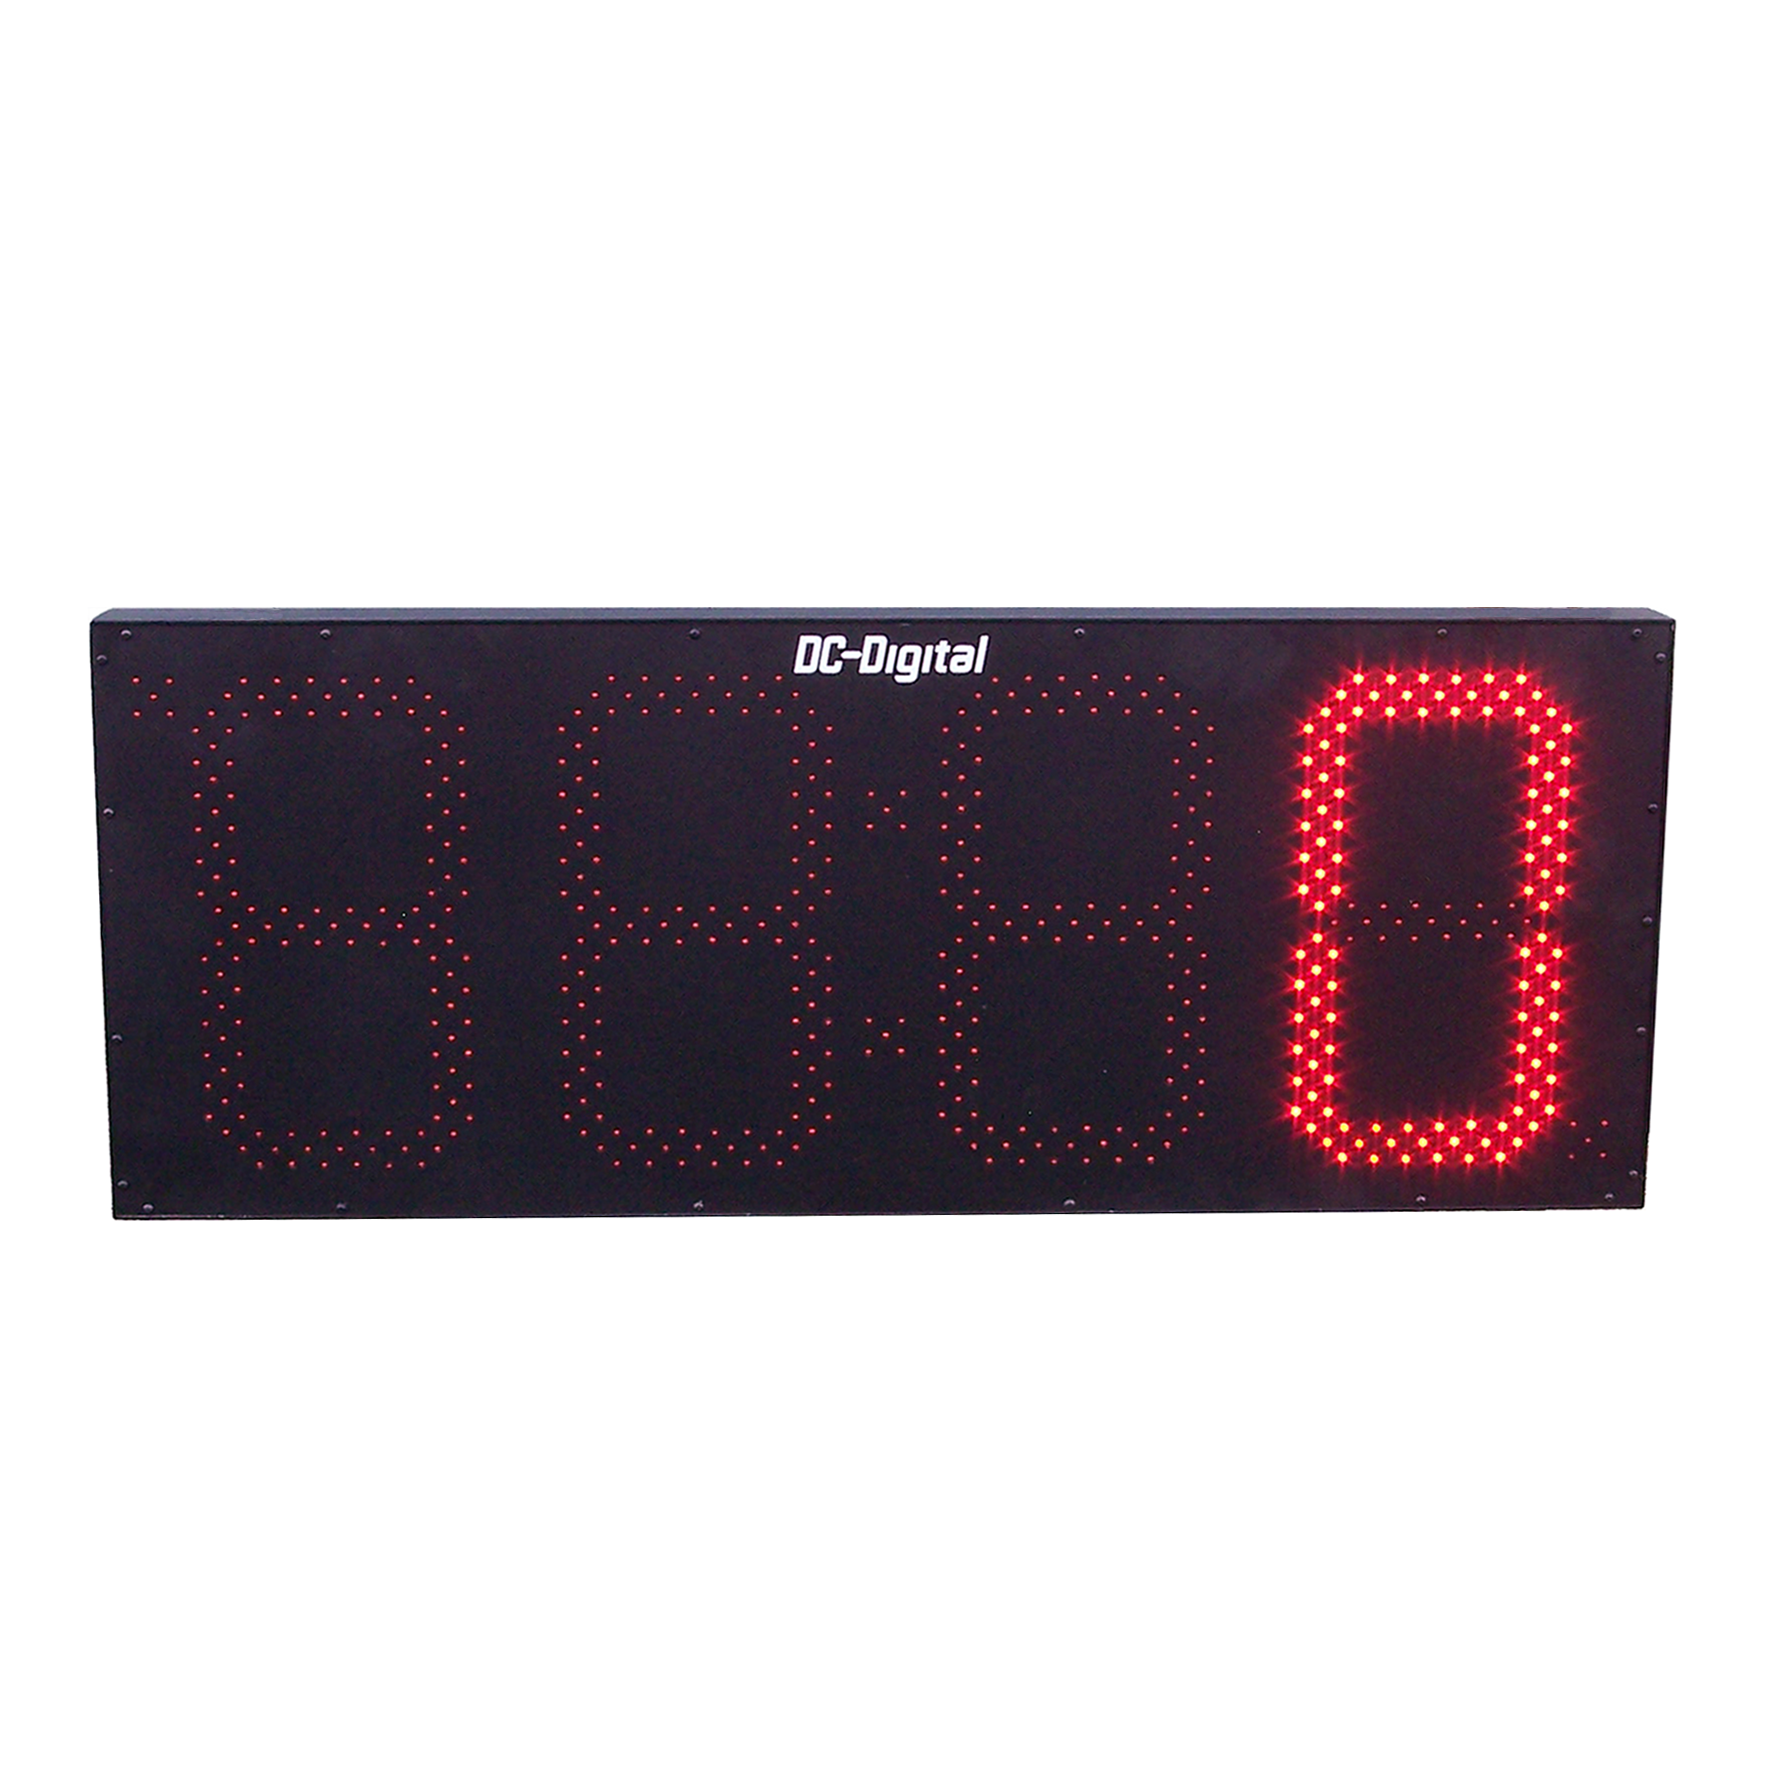 (DC-150T-UP-DAYS) 15.0 Inch LED Digital, Environmentally Sealed Push-Button Controlled, Count Up by Days Timer (OUTDOOR)